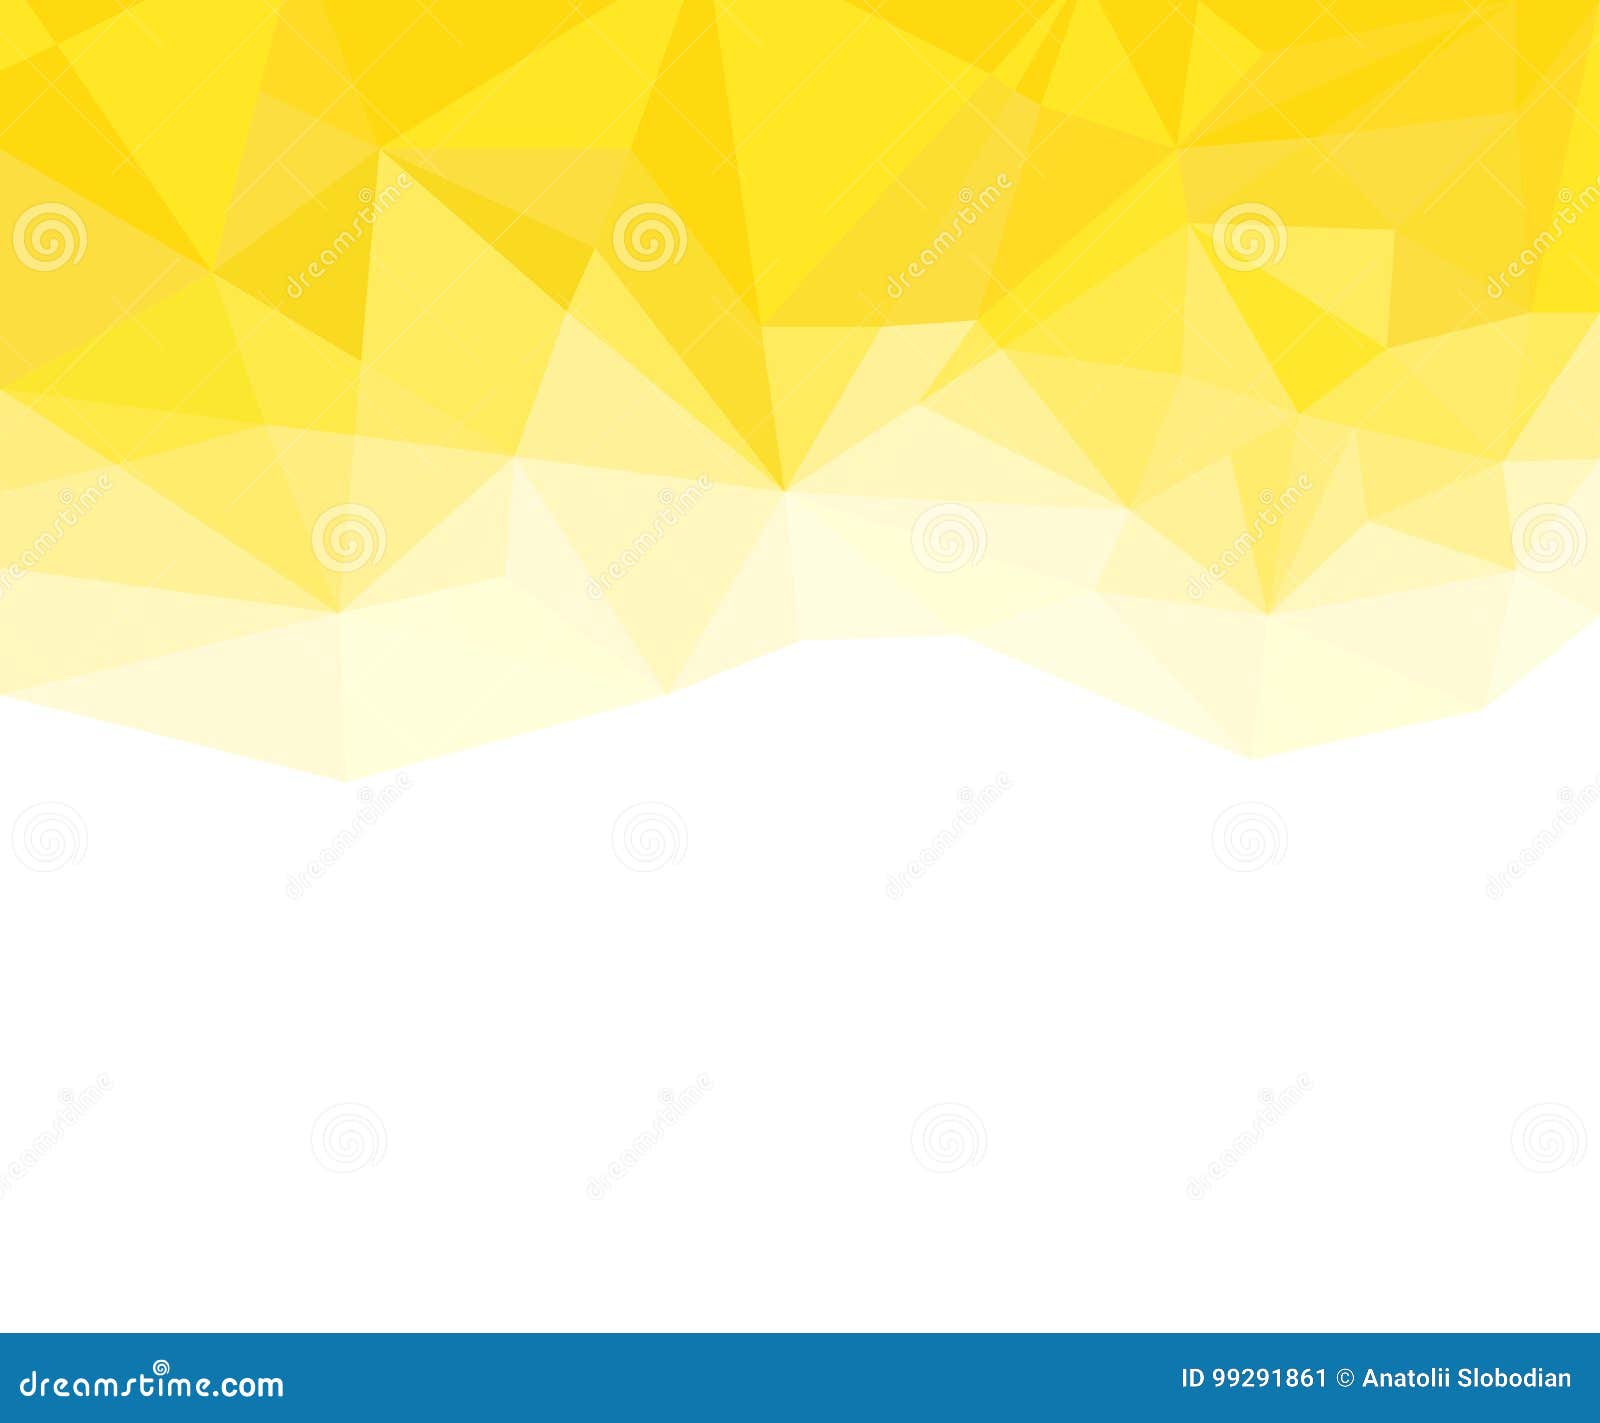 Geometric Yellow and White Abstract Vector Background for Use in Design.  Stock Vector - Illustration of cold, futuristic: 99291861